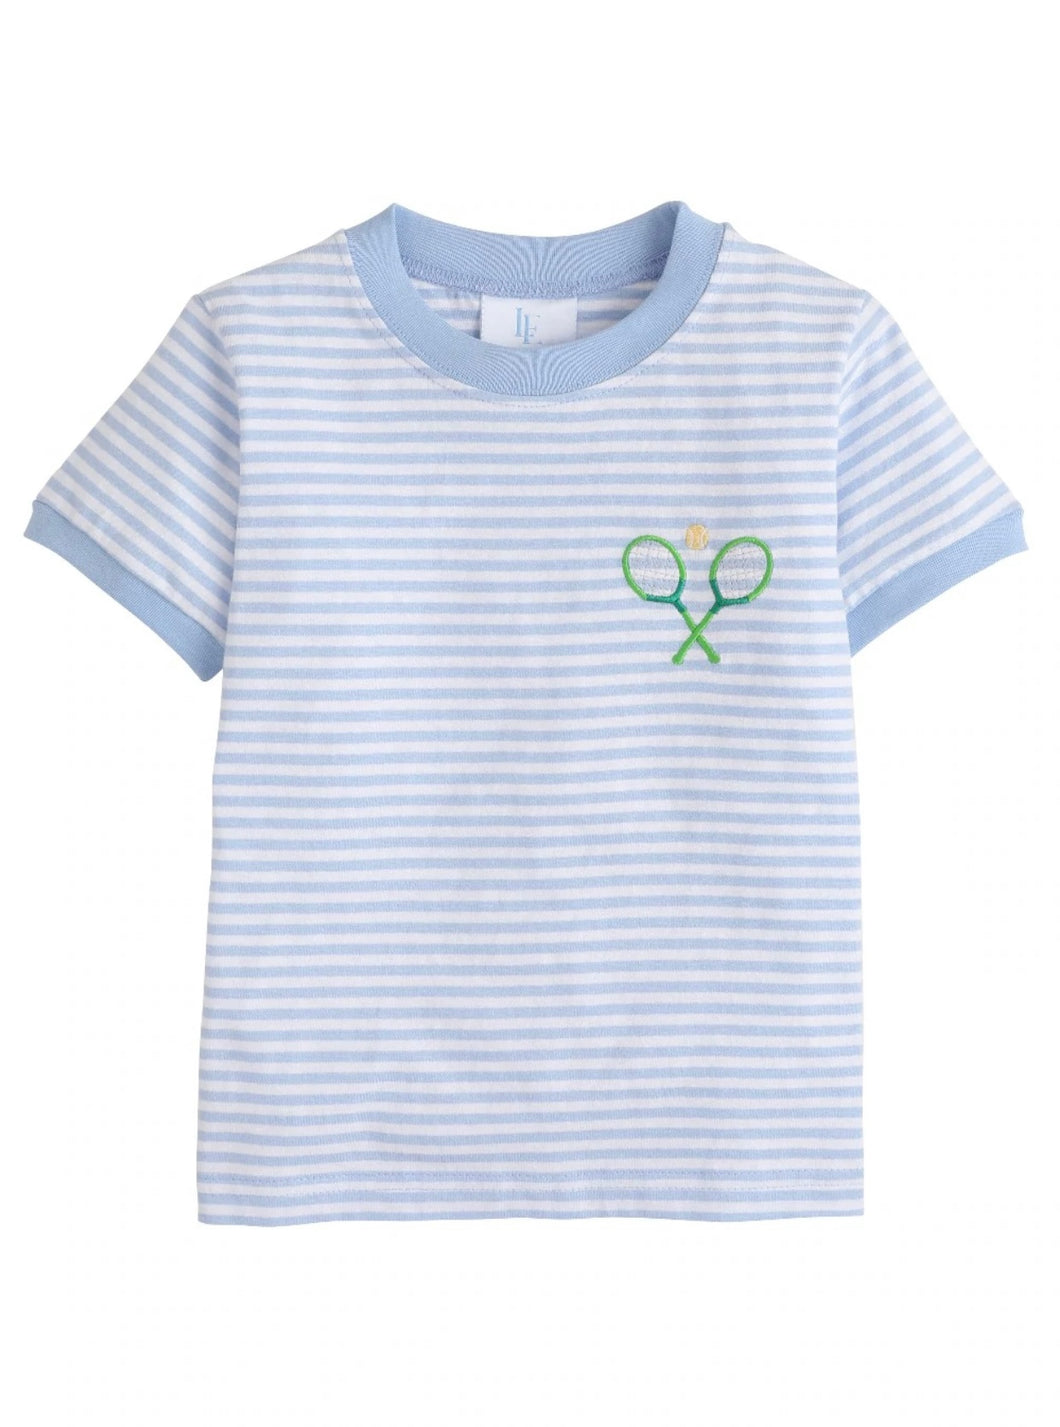 Little English Blue and White Striped Tee with Tennis Racquet Applique